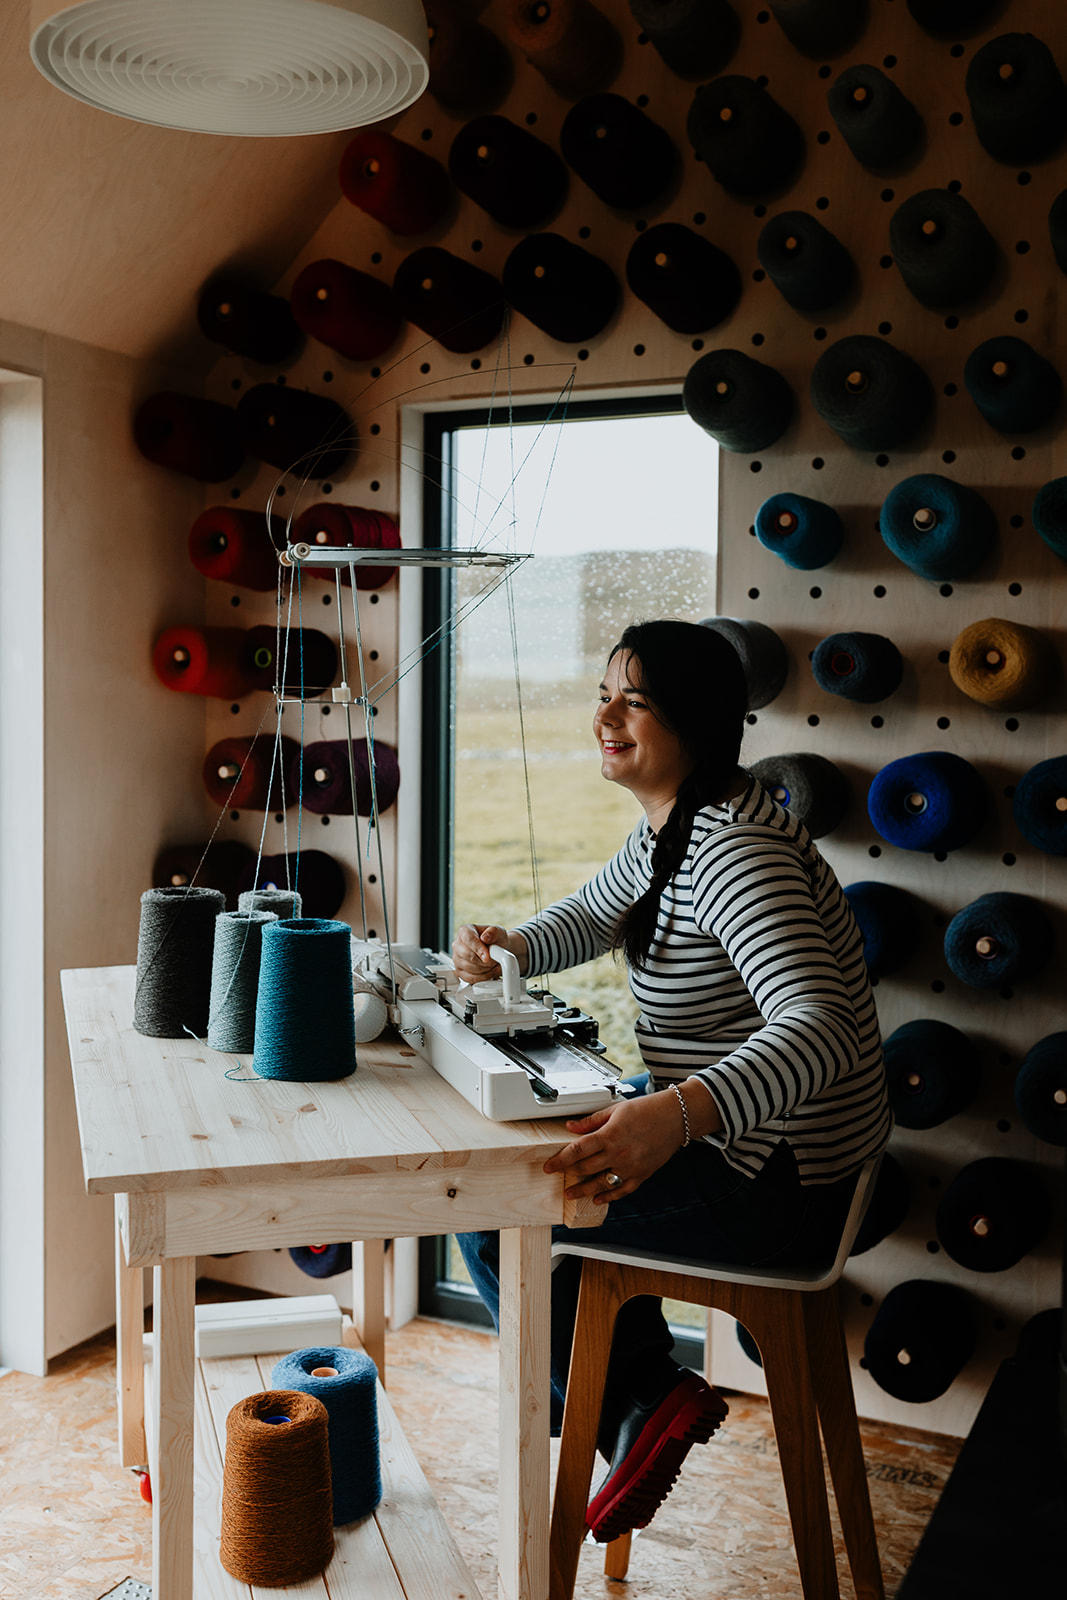 Marie from Fair Isle Knitting Holidays shares what it's like living and running business in a remote island community